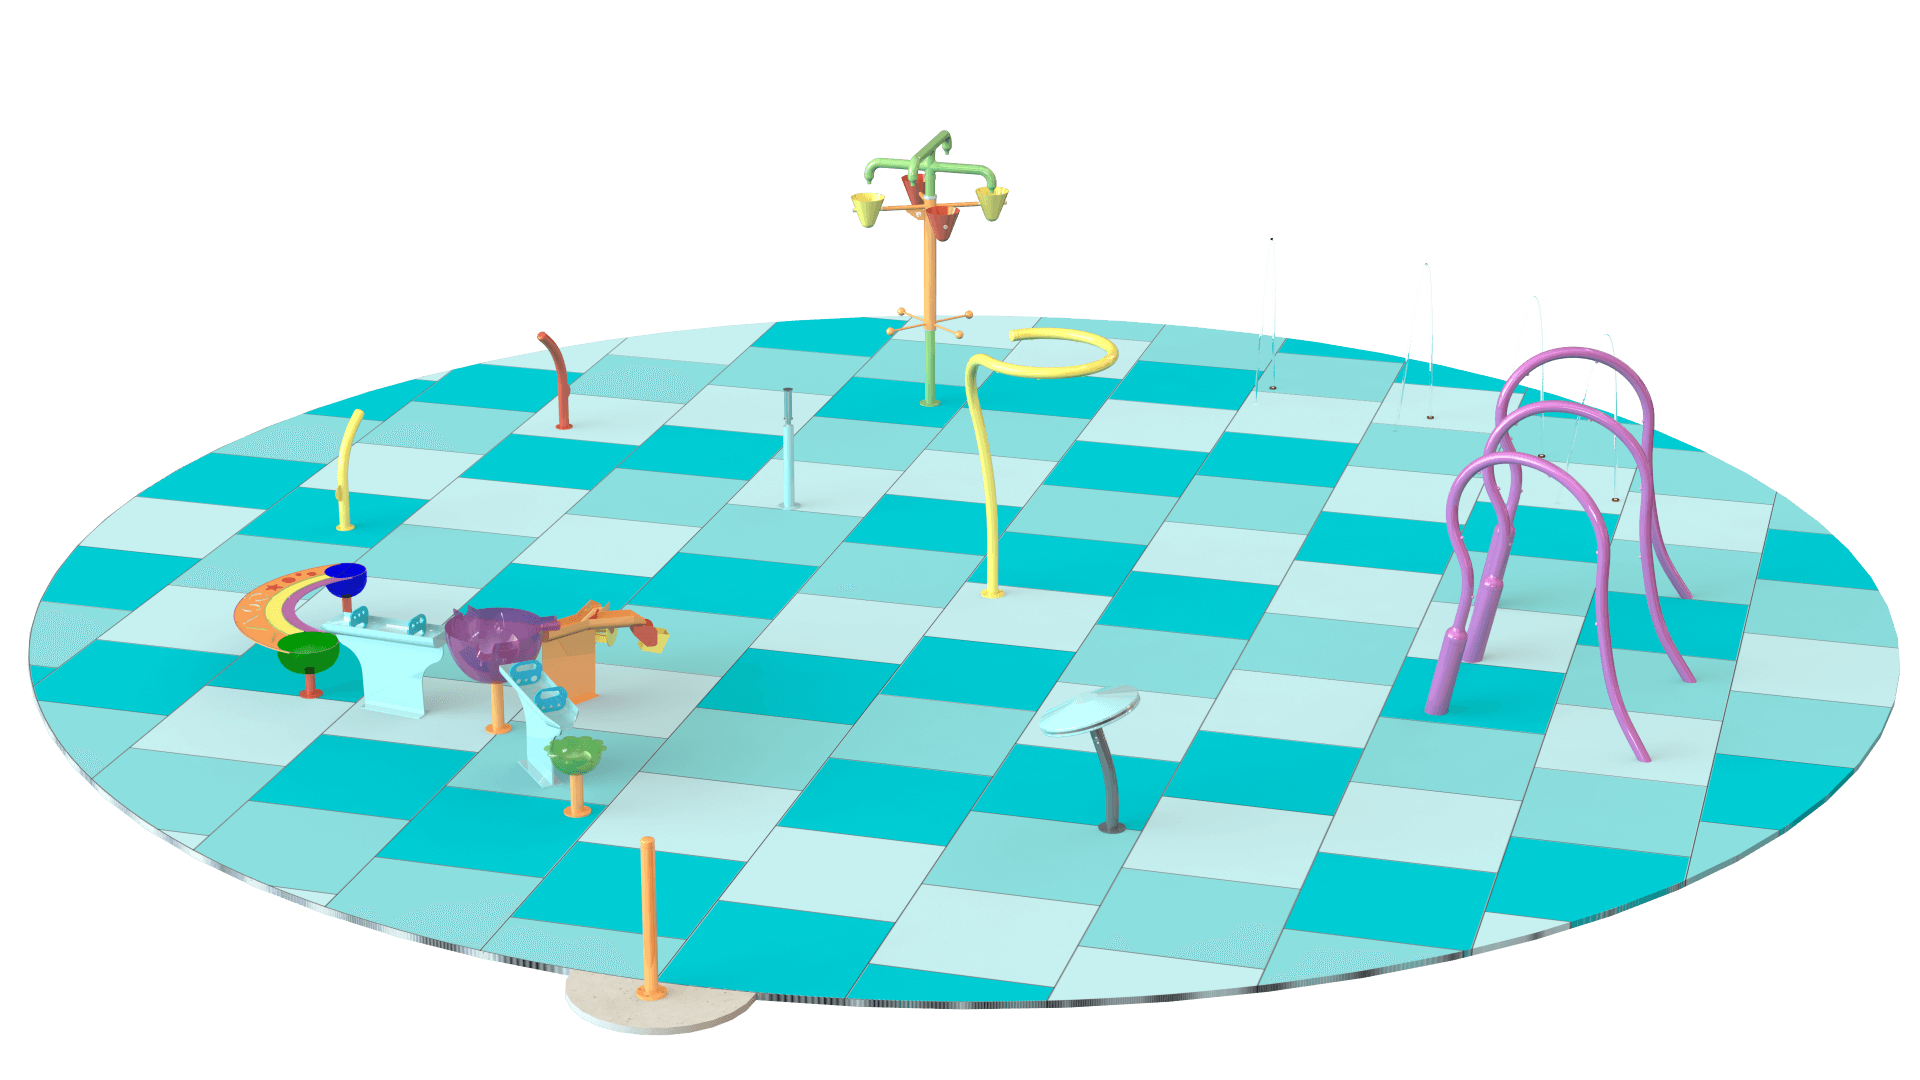 3D rendering of a splash pad concept design by Interactive Play.